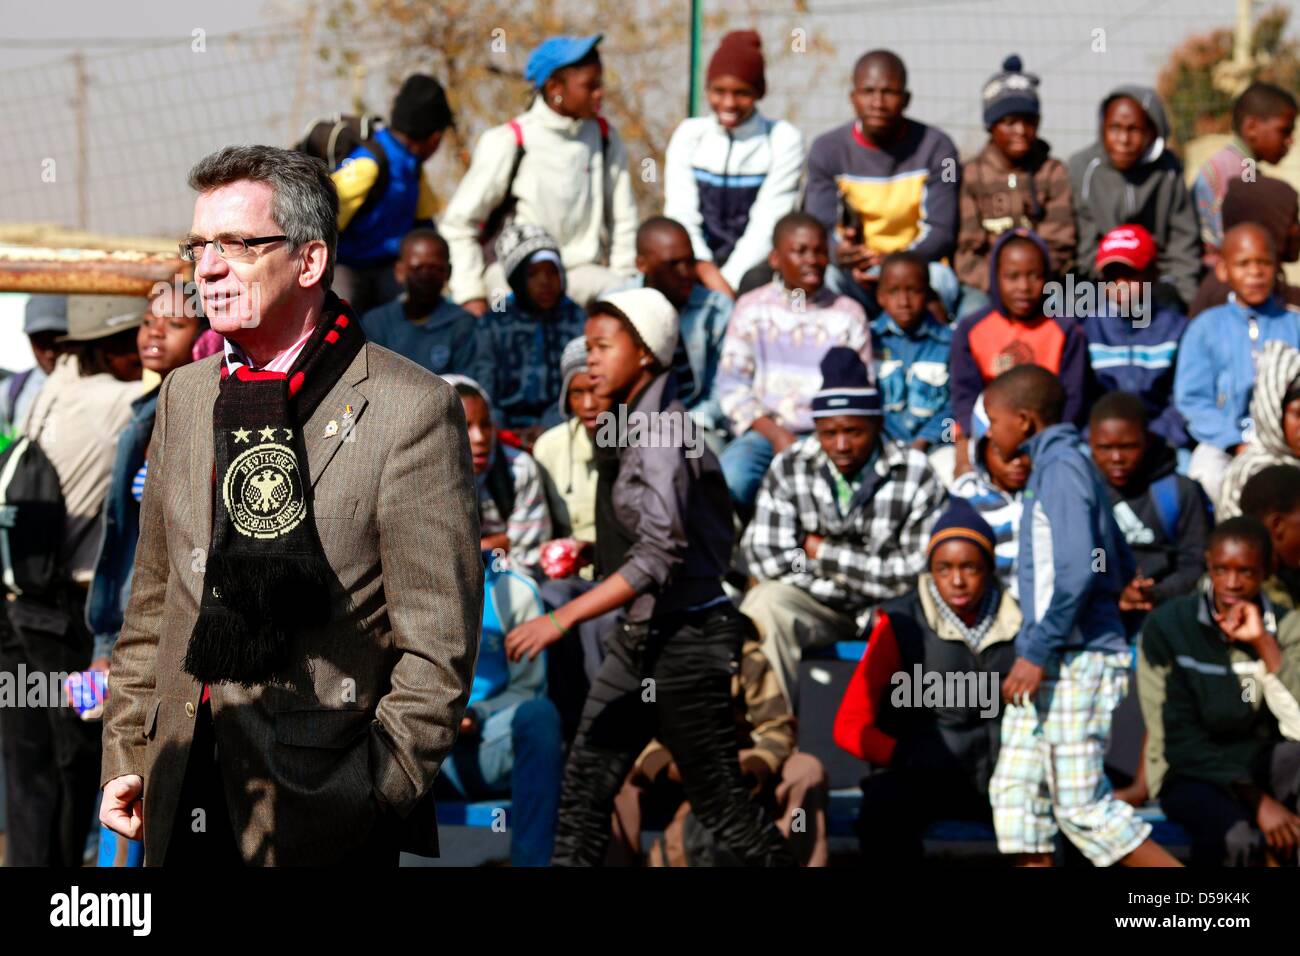 German interior minister Thomas de Maiziere stands in the courtyard of the LoveLife Youth Center during his visit to the Orange Farm township, about 30km south of Johannesburg, South Africa on 27 June 2010. De Maiziere is on a three-day visit to South Africa. Photo: Kerim Okten -  +++(c) dpa - Bildfunk+++ Stock Photo